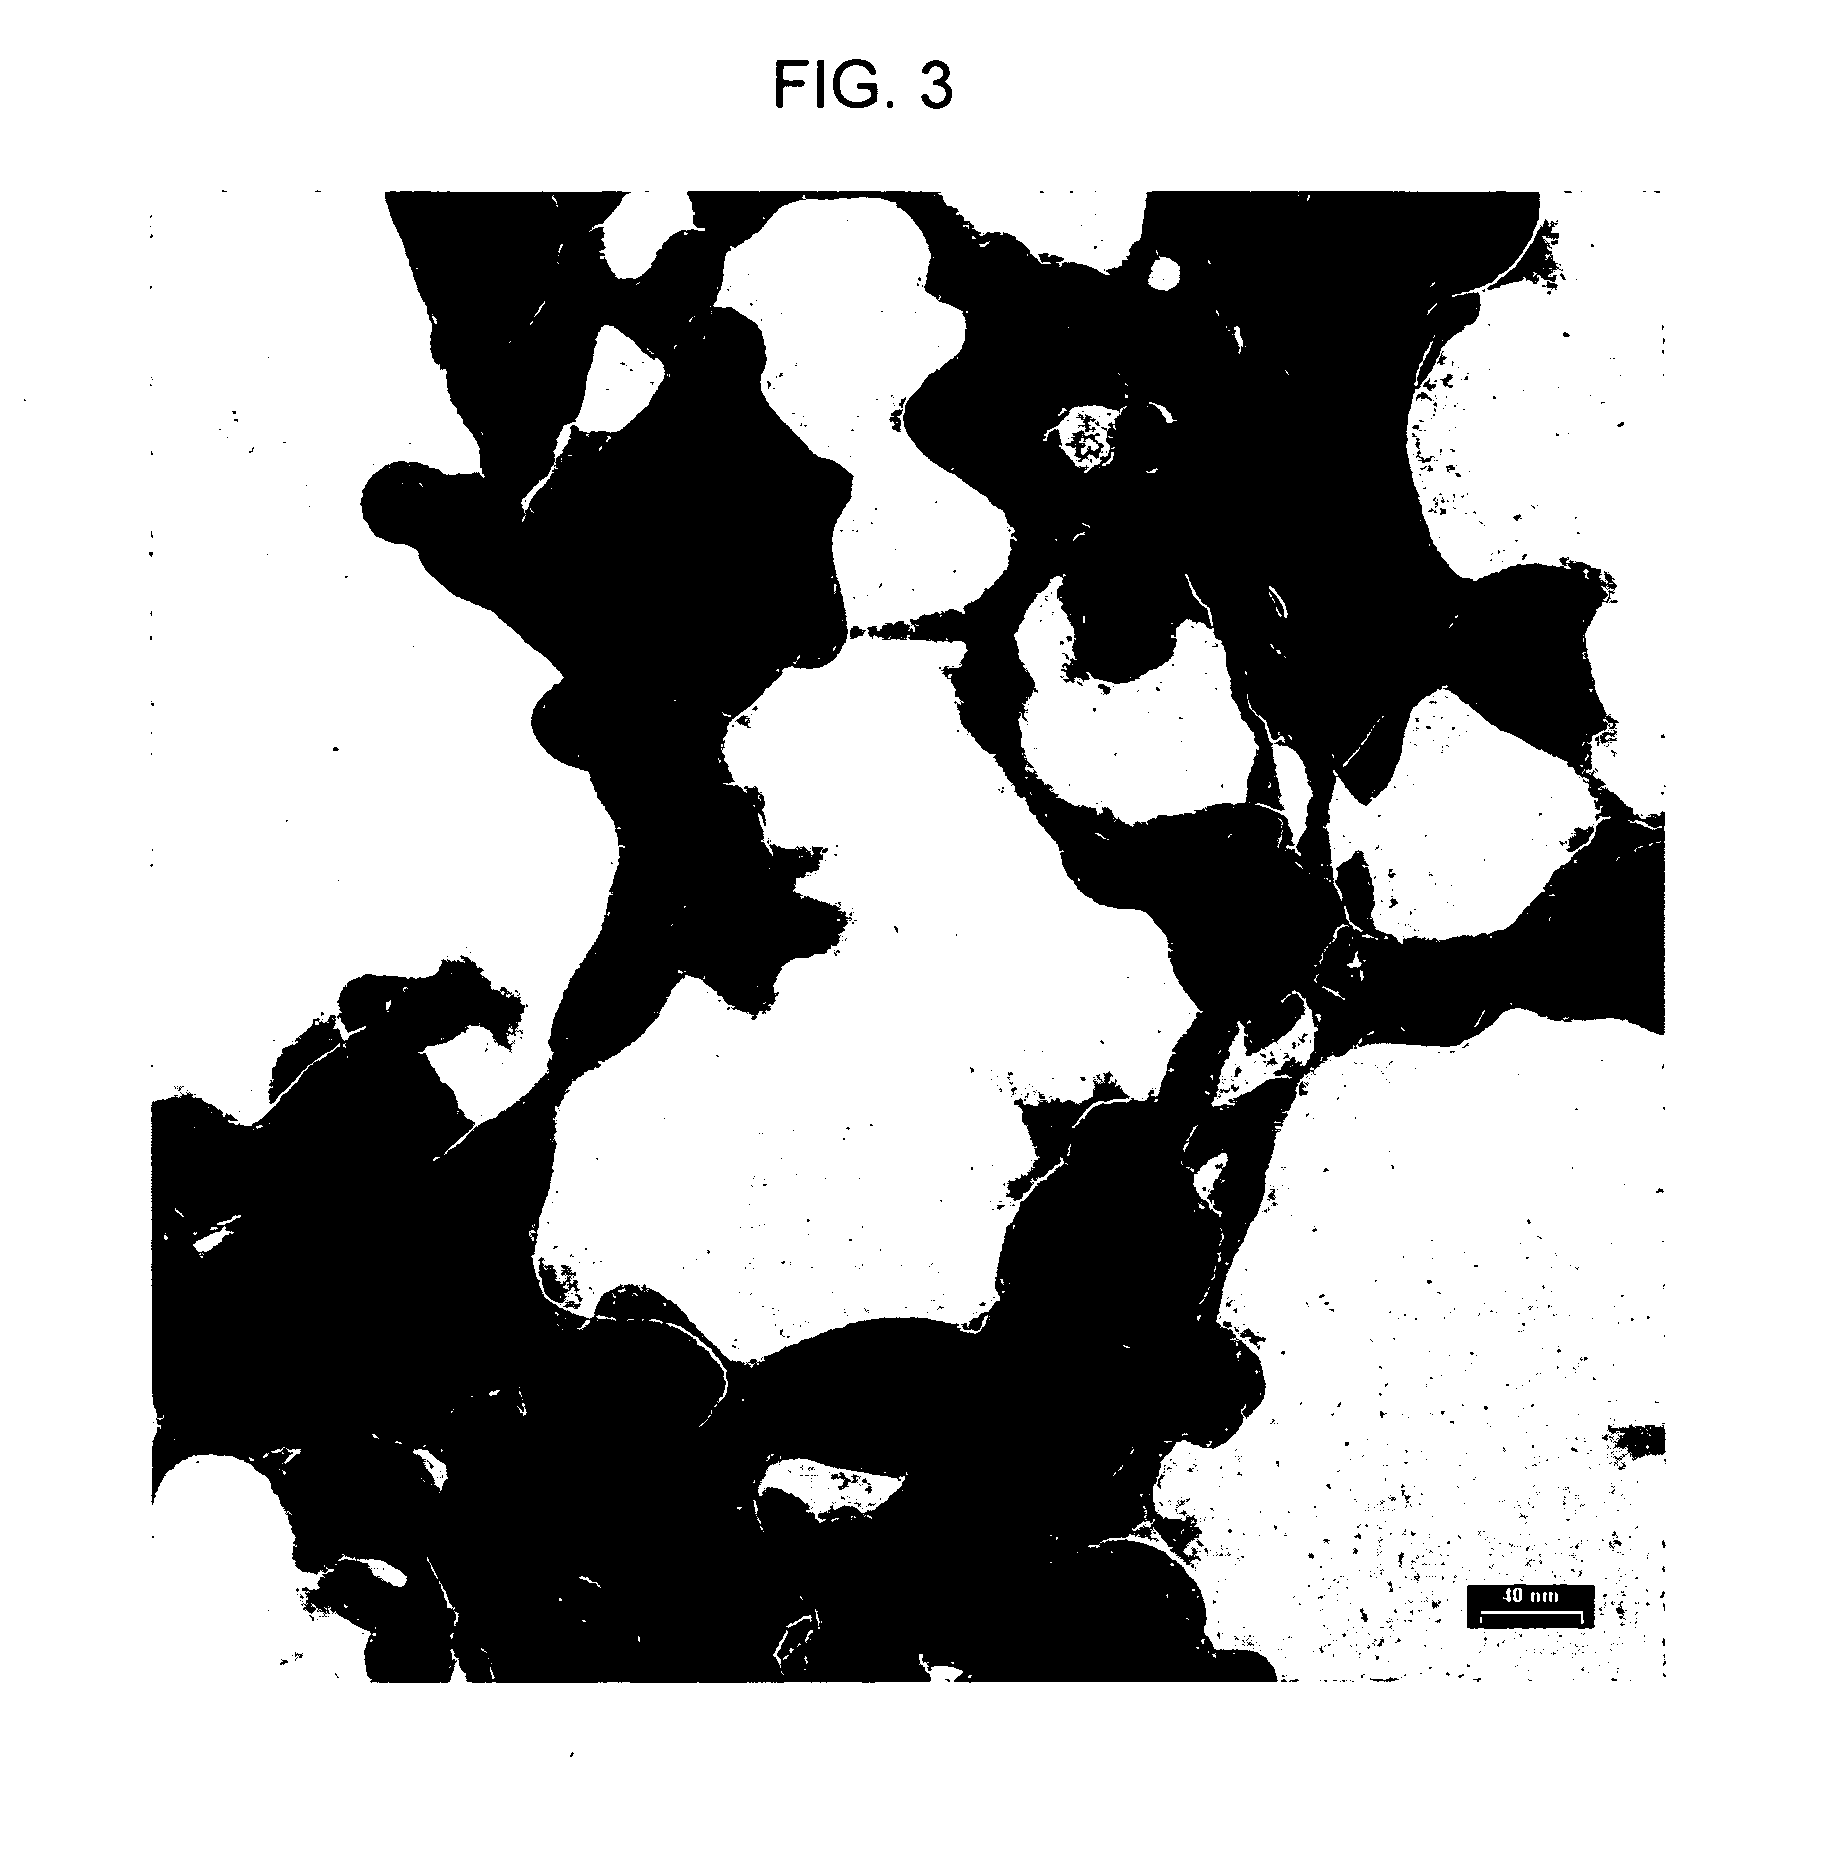 Aluminum phosphate or polyphosphate particles for use as pigments in paints and method of making same